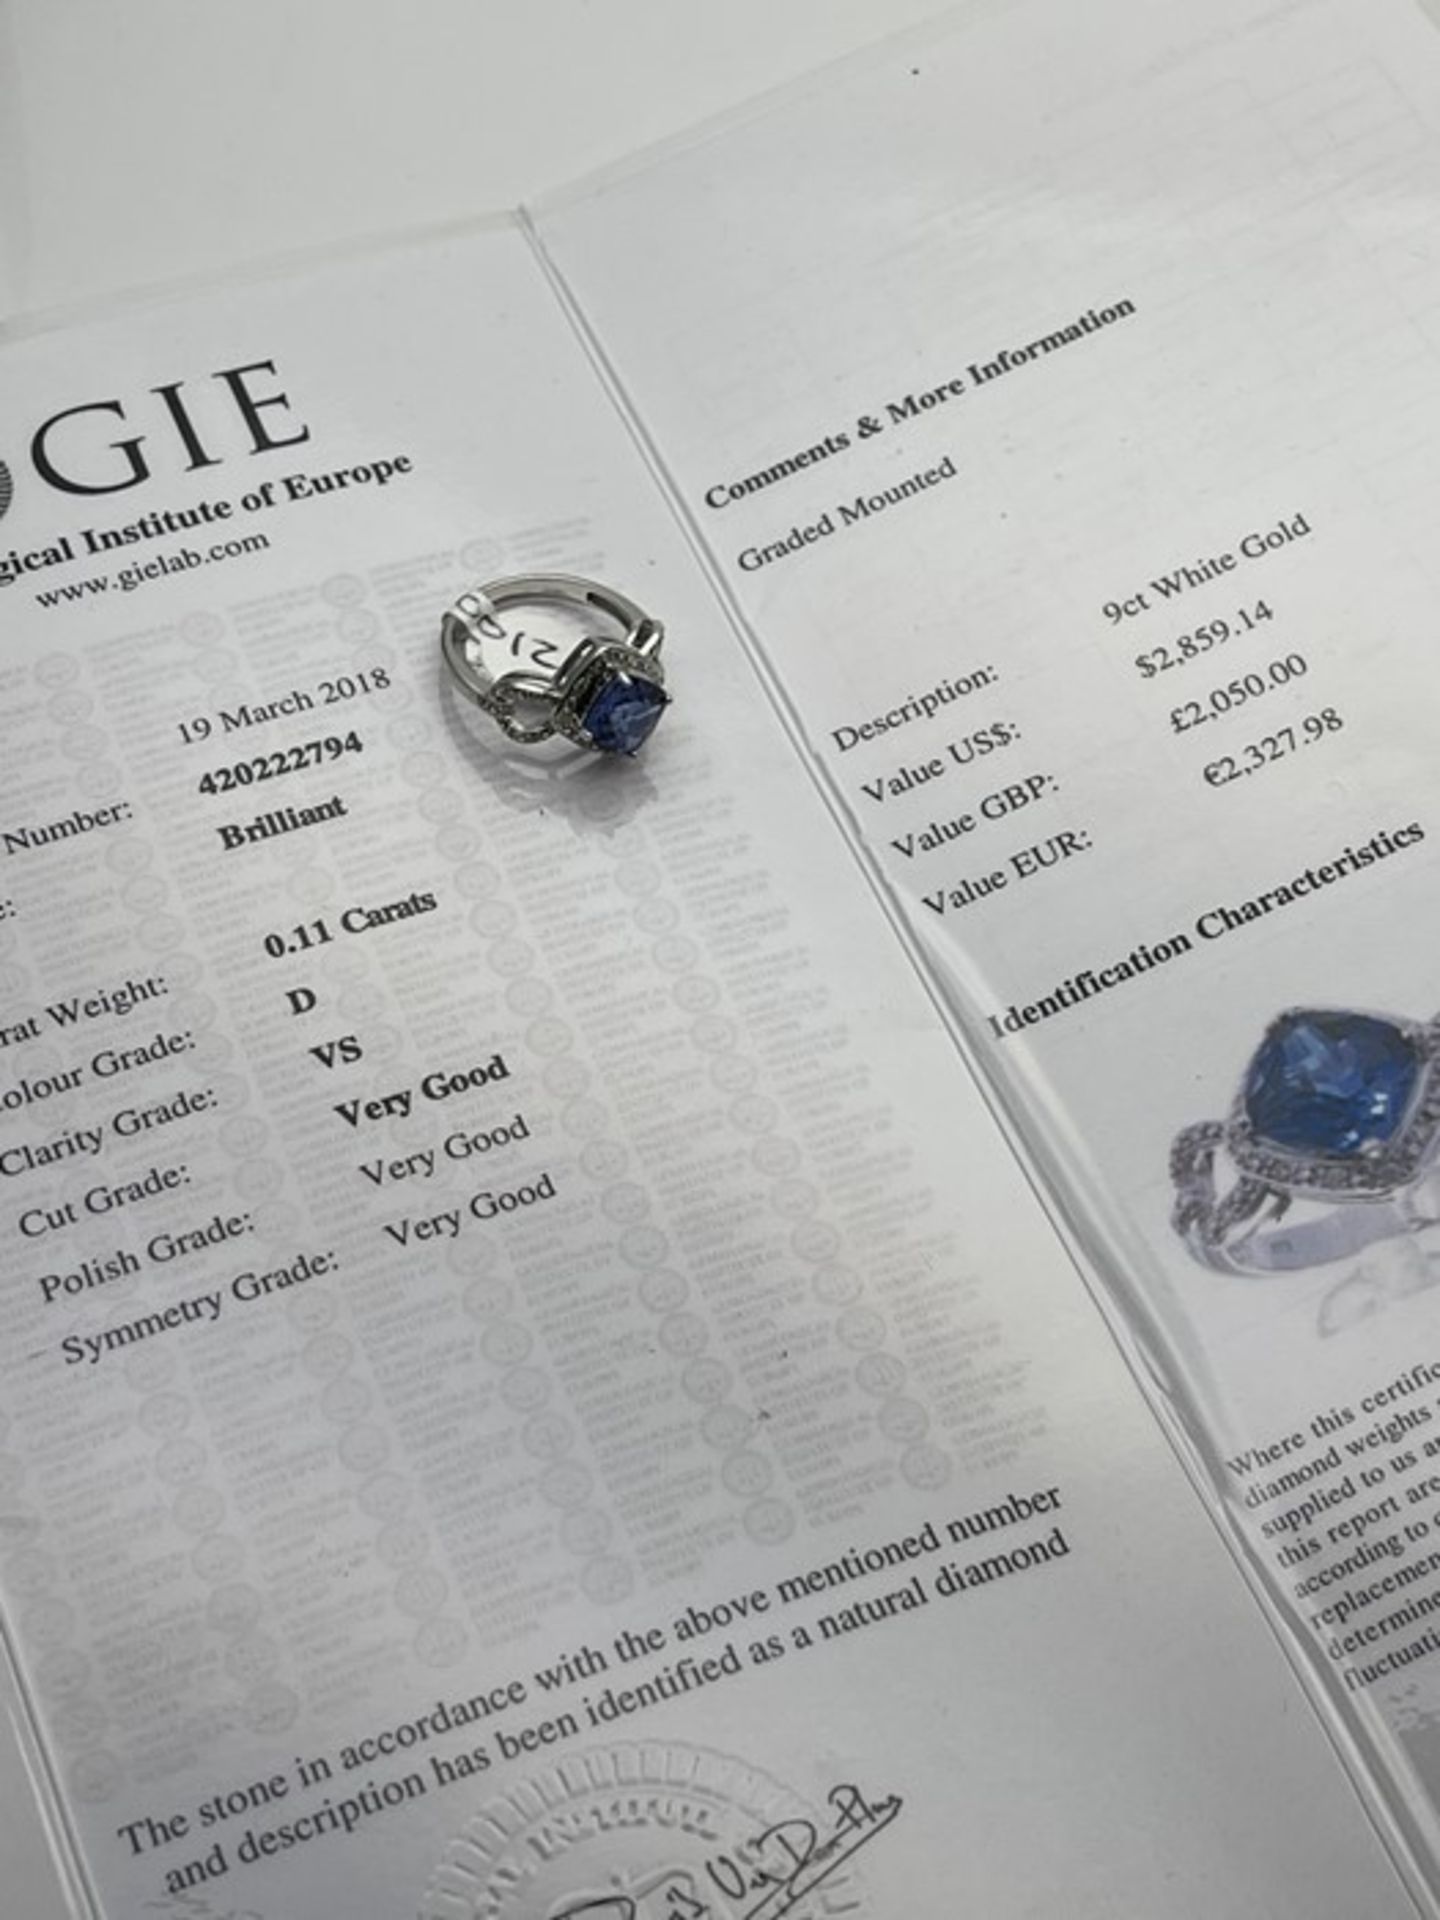 ***£2327.98*** 9CT WHITE GOLD LADIES DIAMOND RING SET WITH A BLUE CENTER STONE, D, VS QUALITY, - Image 3 of 3